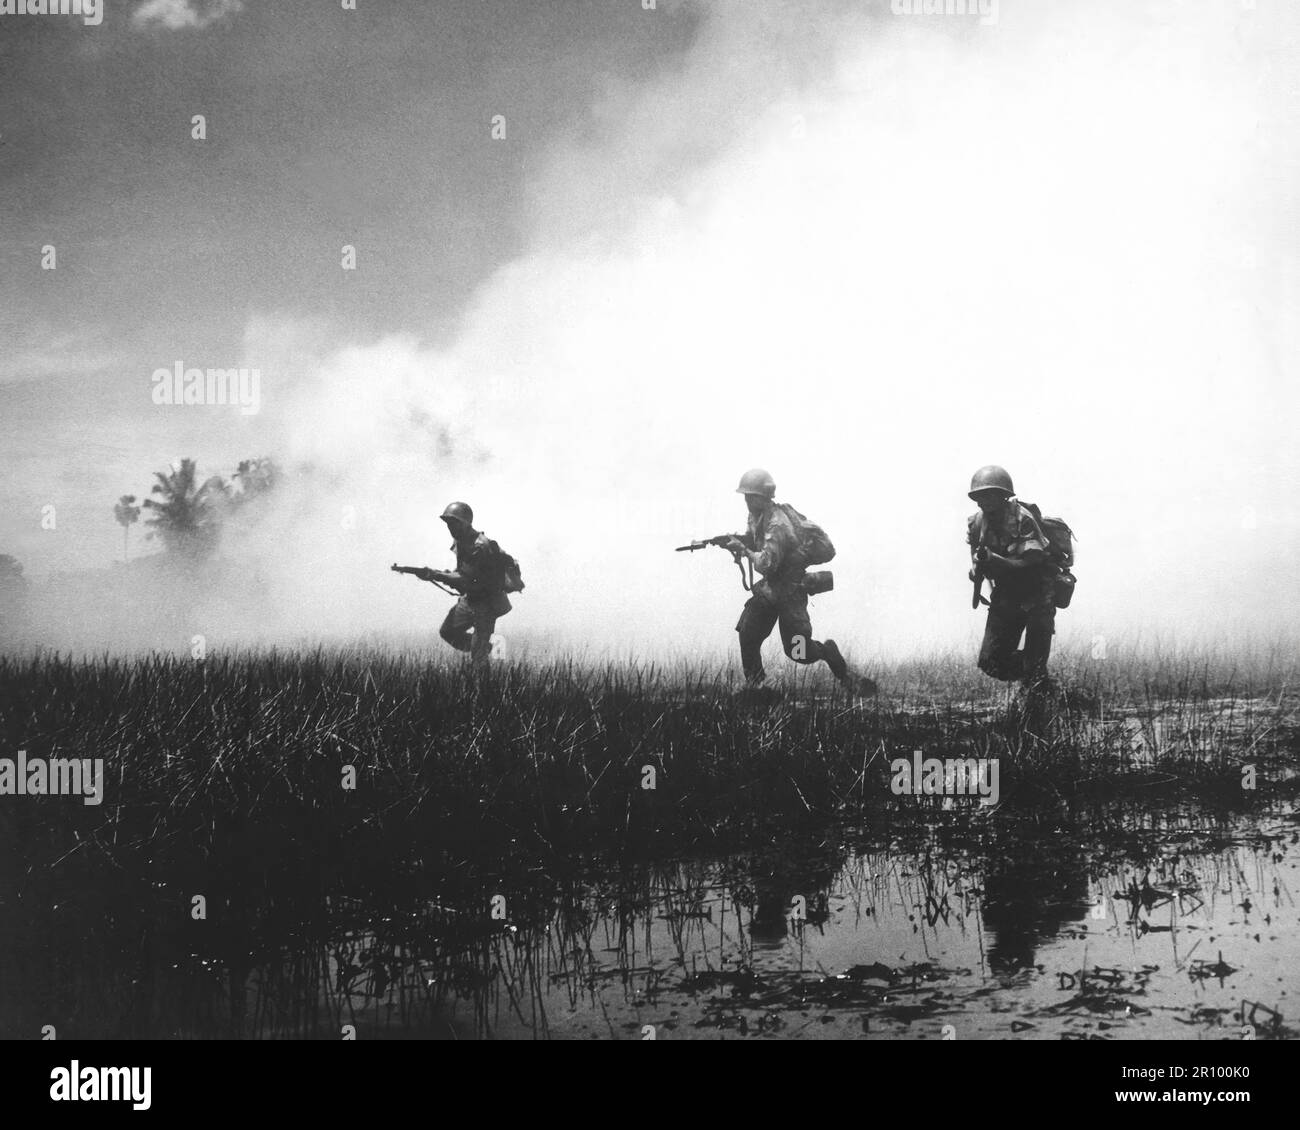 Troops of the Vietnamese Army in combat operations against the Communist Viet Cong guerillas.  Marshy terrain of the delta country makes their job of rooting out terrorists hazardous and extremely difficult. Circa 1961. Stock Photo